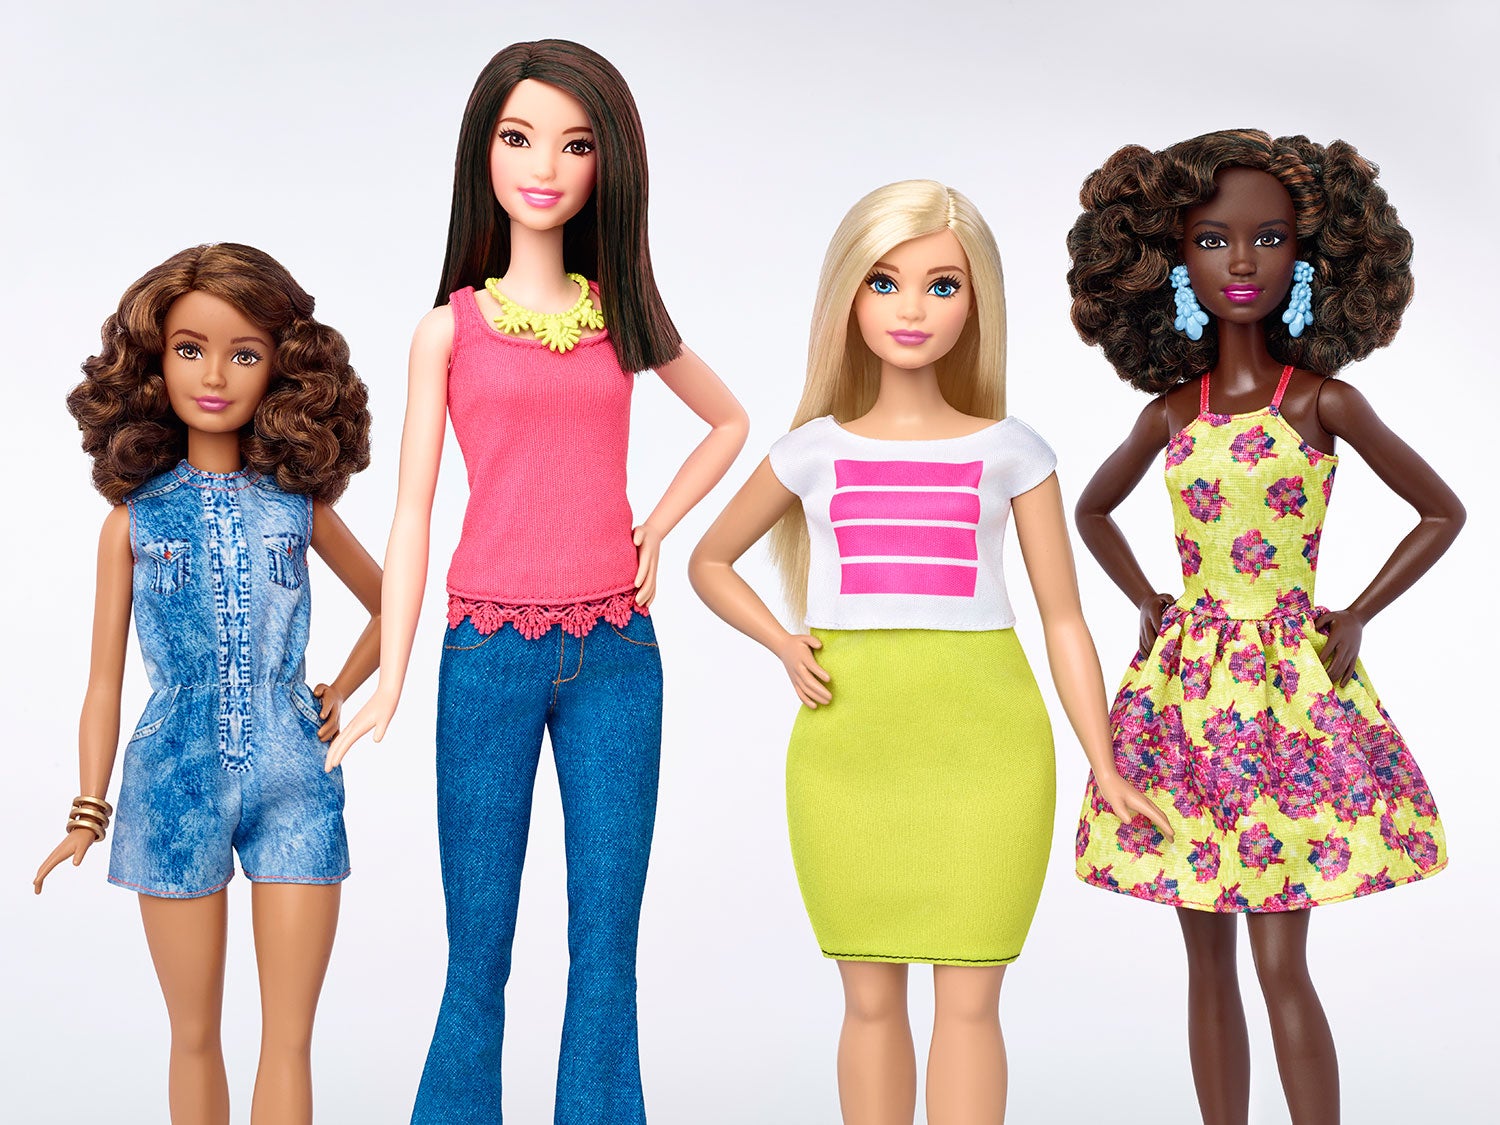 barbies with disabilities